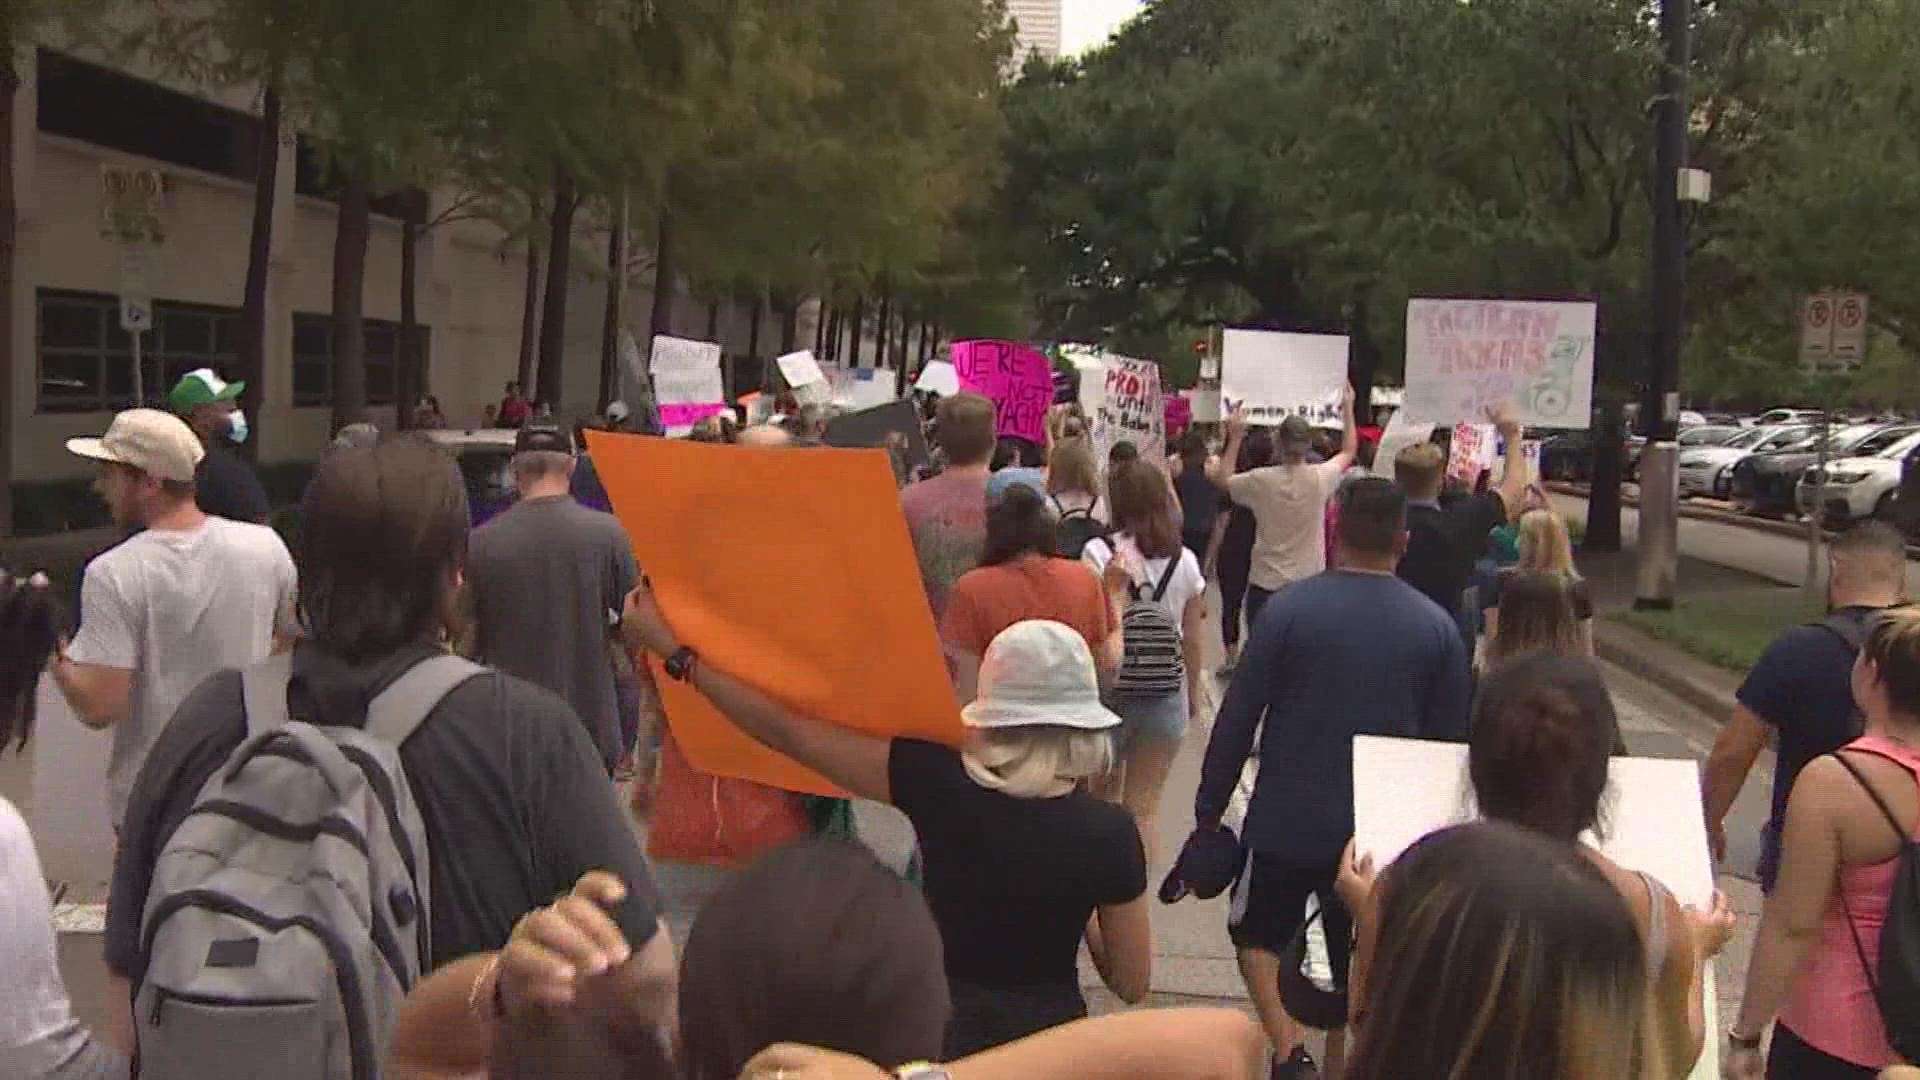 Chants could be heard throughout downtown Houston as hundreds of pro-choice marchers took to the streets Saturday morning to protest the new Texas abortion law.